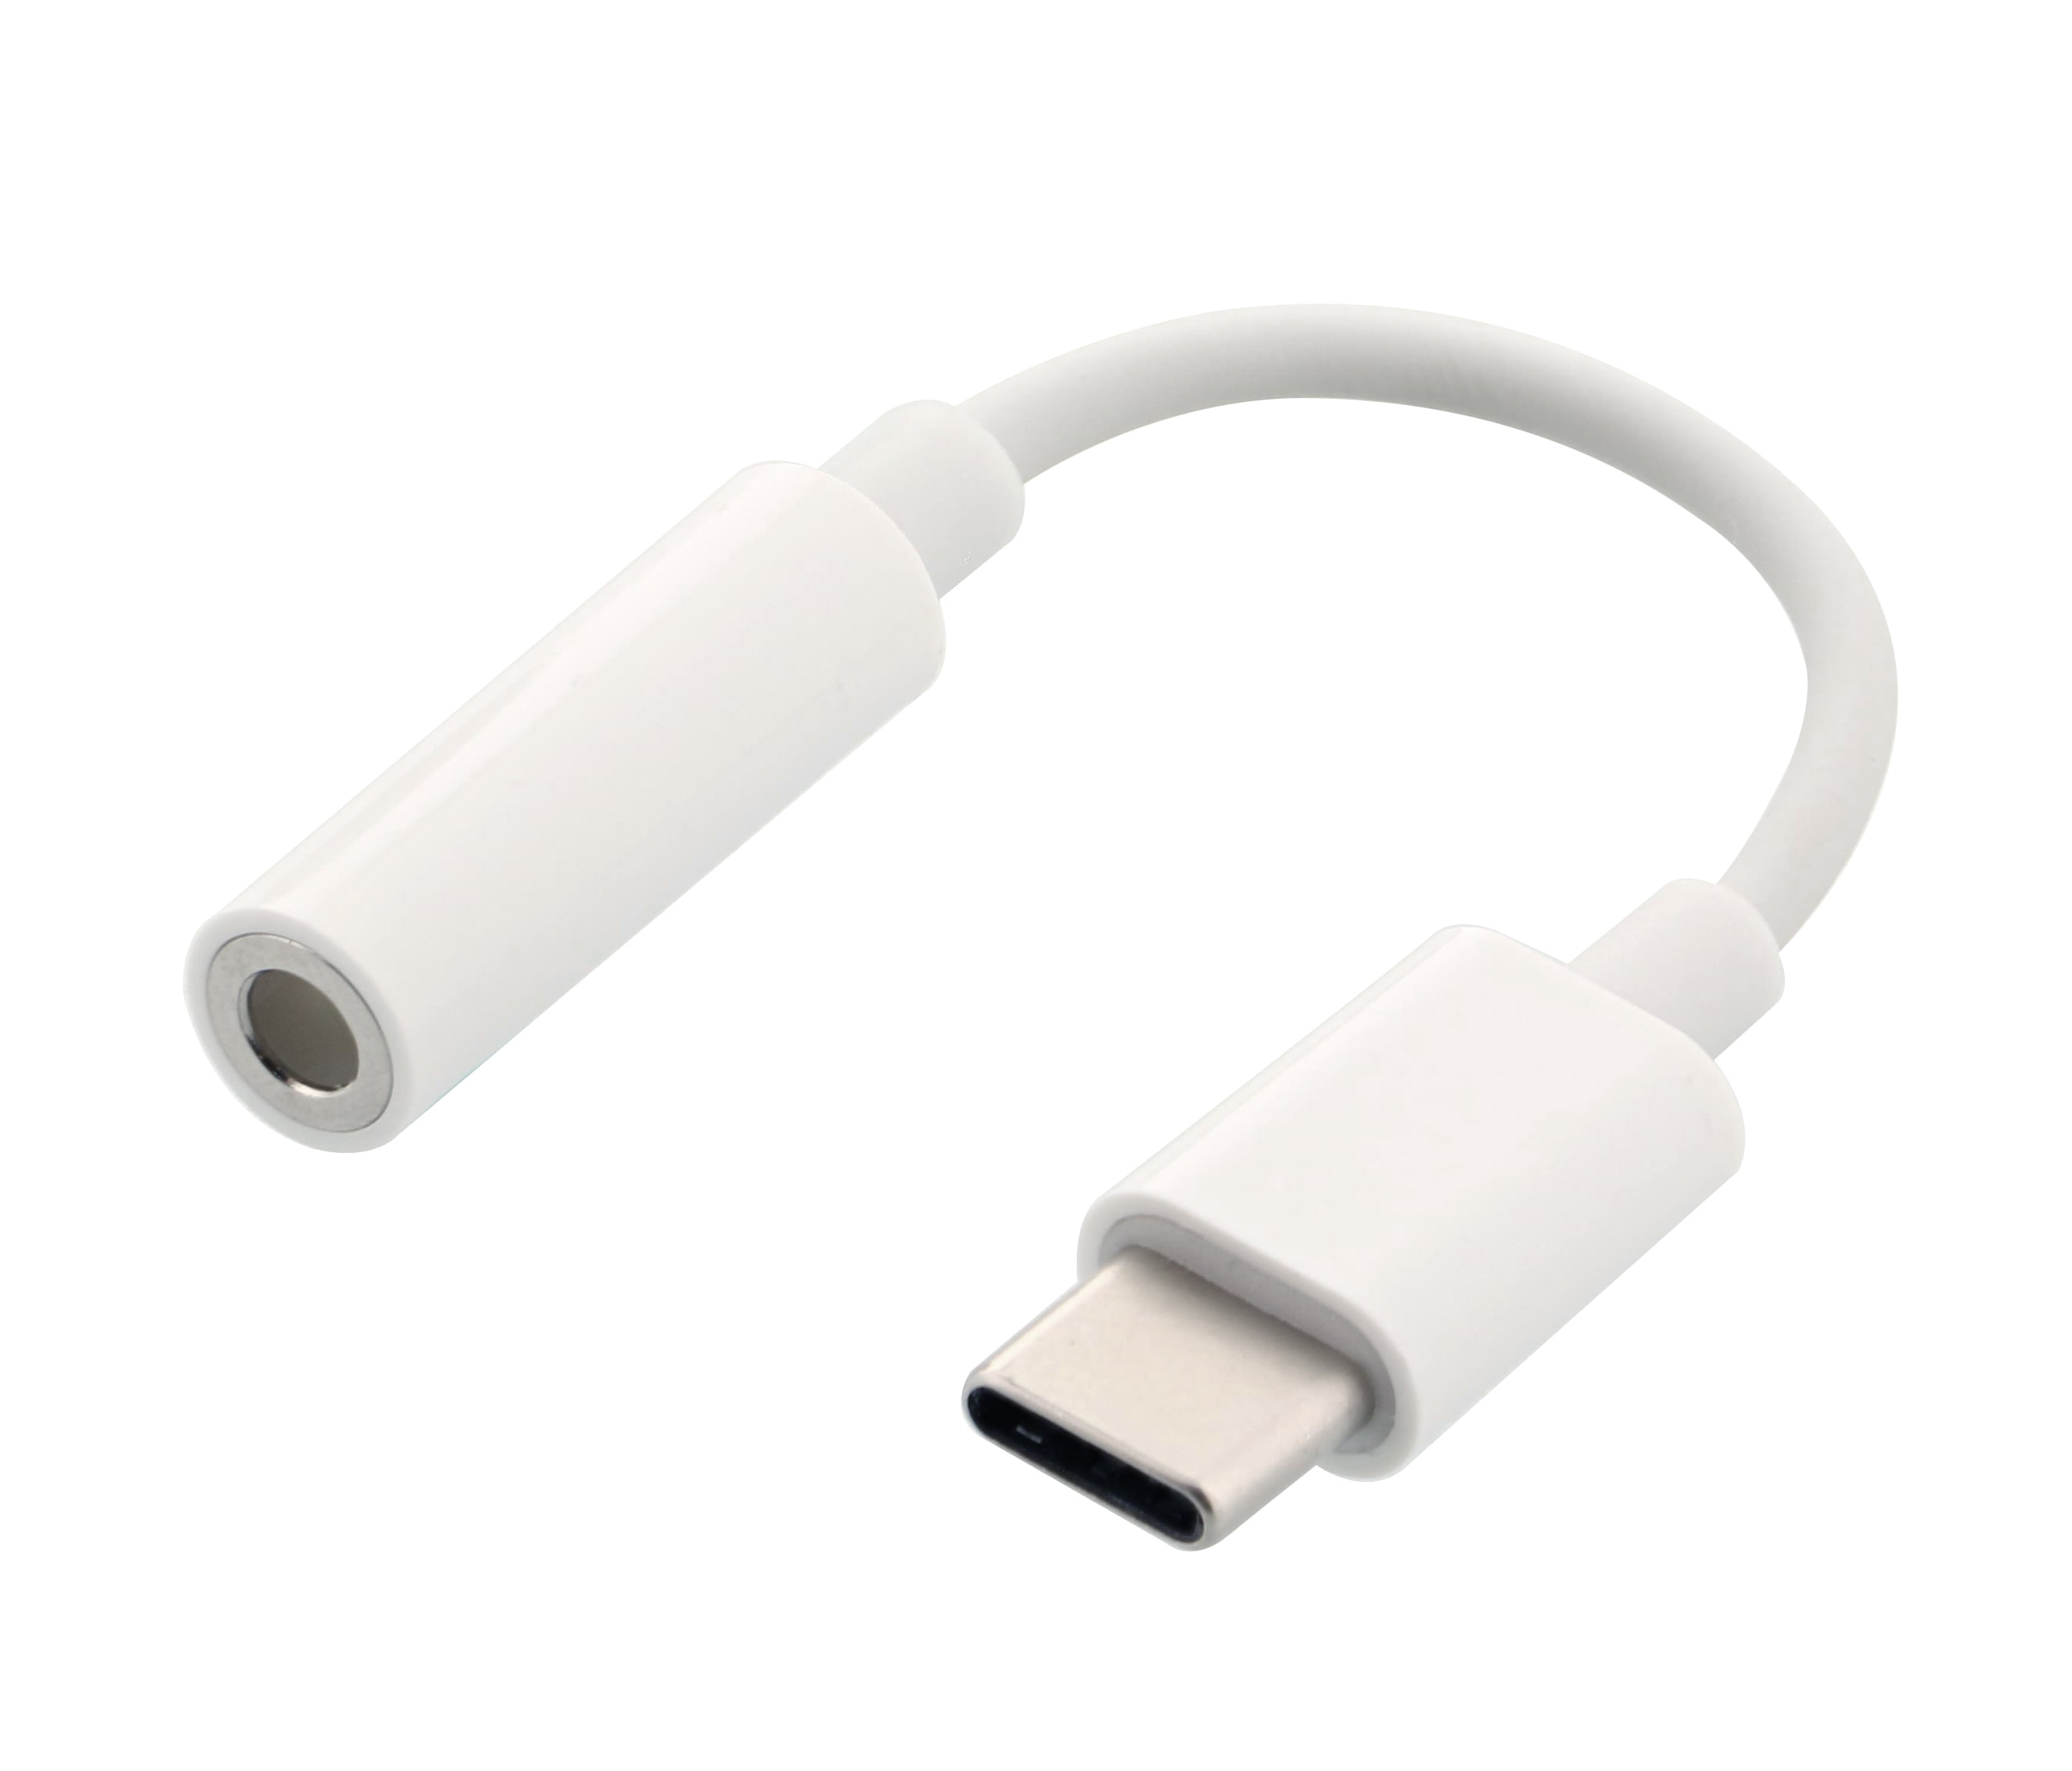 onn. Auxiliary 3.5mm to C Adapter - Walmart.com